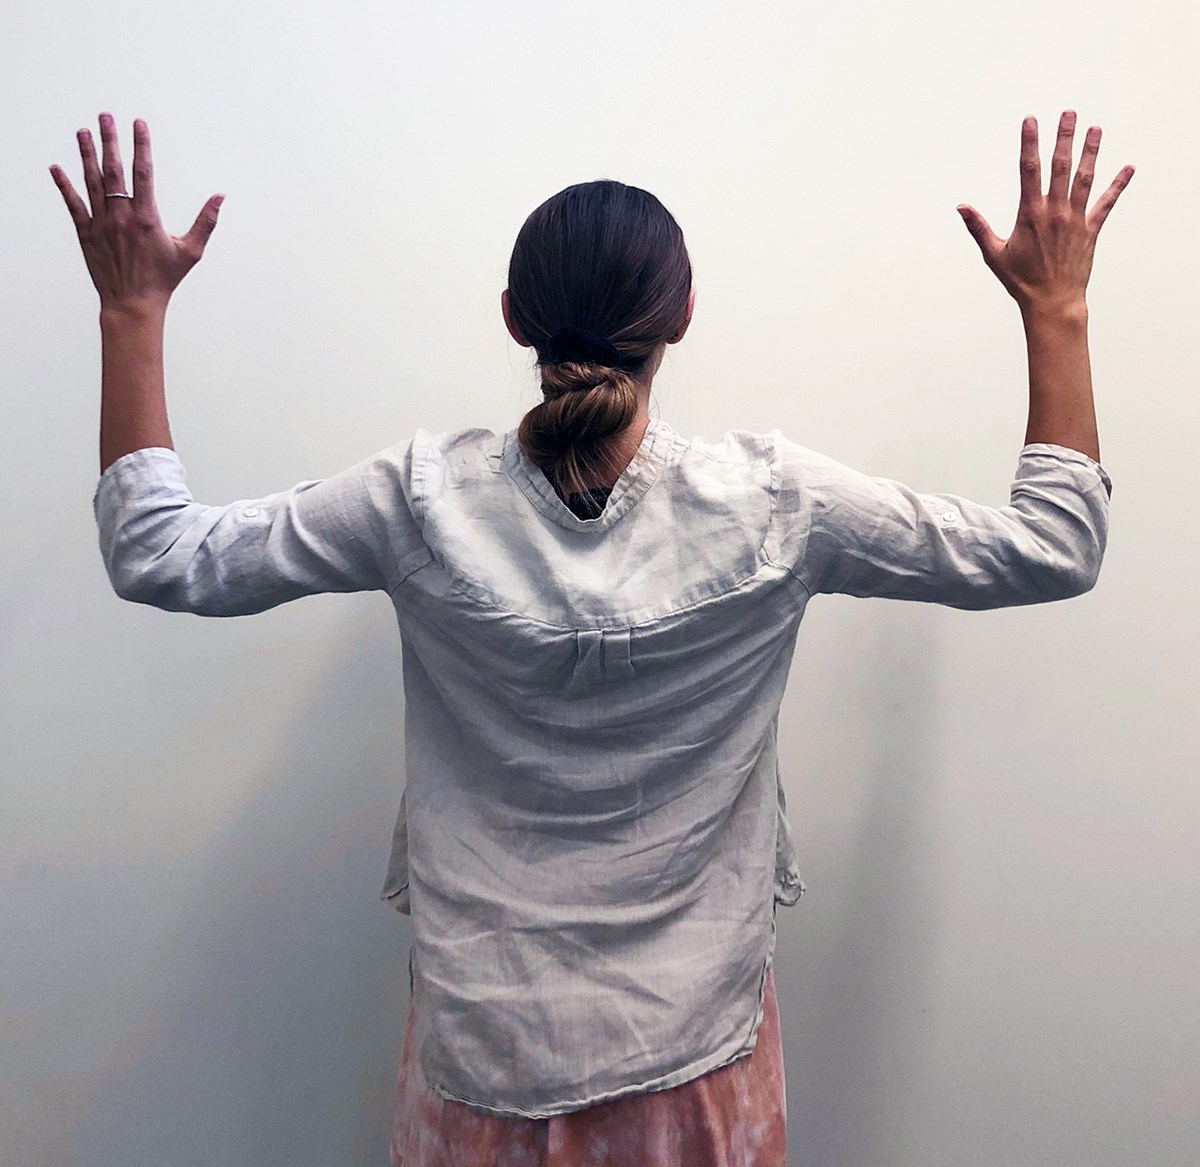 A person raises both arms out to their sides while inhaling. Their elbows are bent to a 90 degree angle and the fingers are pointed towards the ceiling.